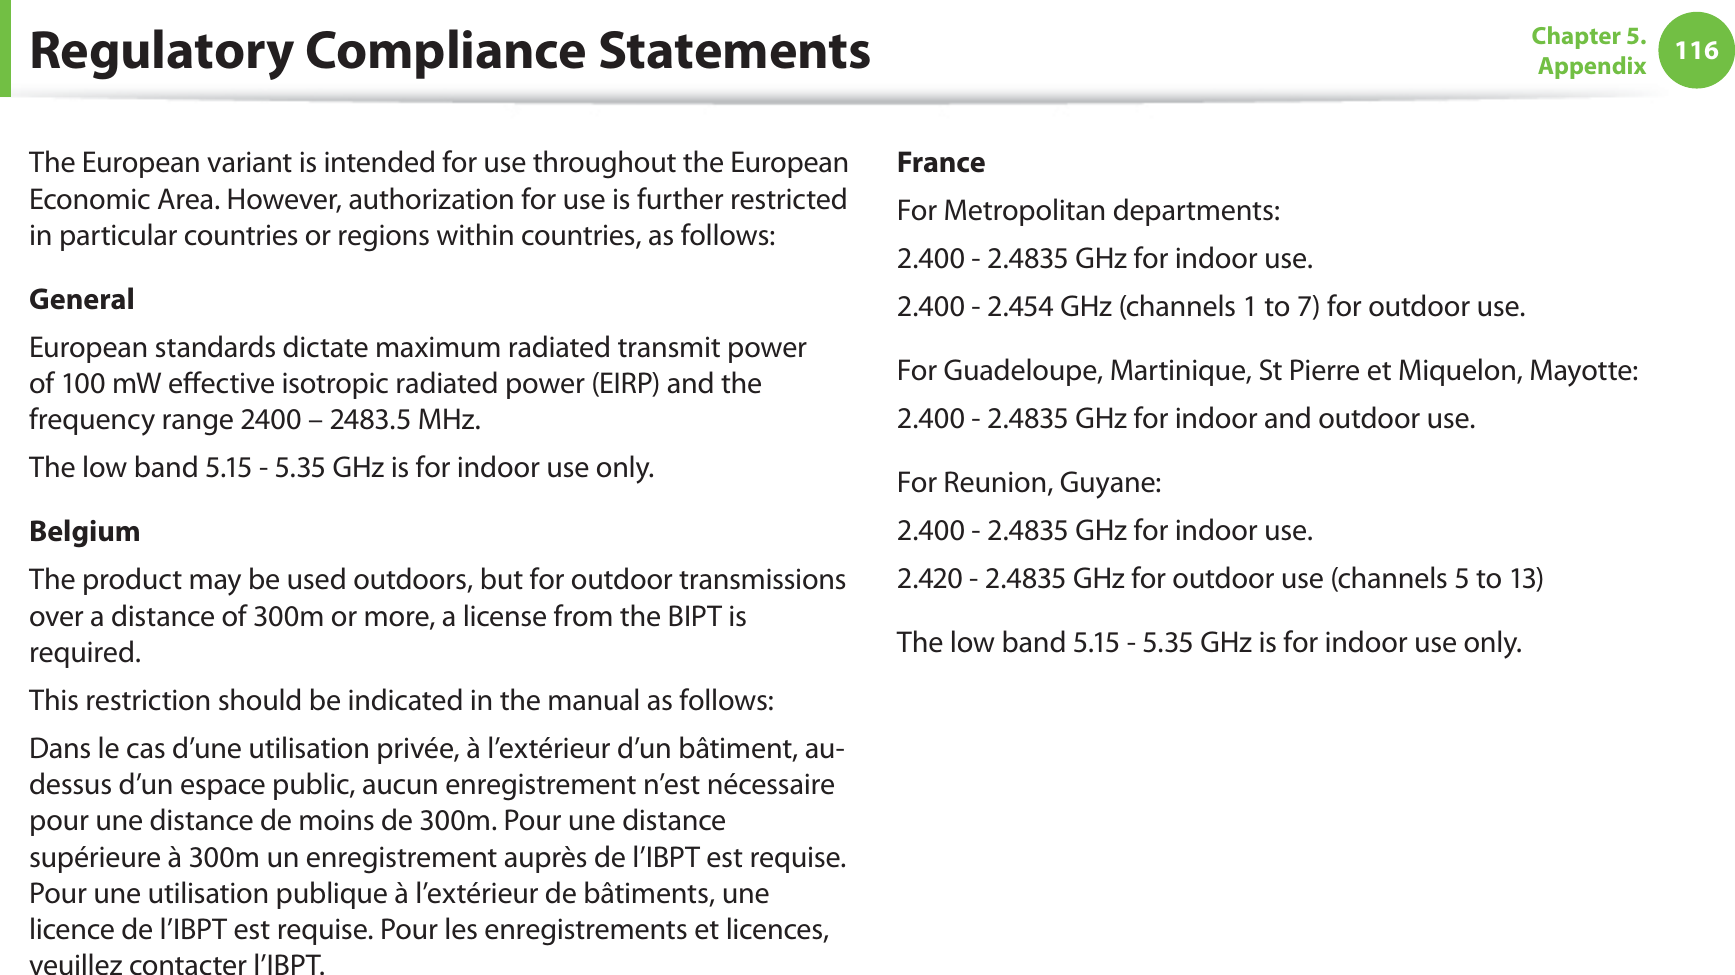 116Chapter 5.  AppendixRegulatory Compliance StatementsThe European variant is intended for use throughout the European Economic Area. However, authorization for use is further restricted in particular countries or regions within countries, as follows: GeneralEuropean standards dictate maximum radiated transmit power of 100 mW eﬀective isotropic radiated power (EIRP) and the frequency range 2400 – 2483.5 MHz.The low band 5.15 - 5.35 GHz is for indoor use only.BelgiumThe product may be used outdoors, but for outdoor transmissions over a distance of 300m or more, a license from the BIPT is required.This restriction should be indicated in the manual as follows:Dans le cas d’une utilisation privée, à l’extérieur d’un bâtiment, au-dessus d’un espace public, aucun enregistrement n’est nécessaire pour une distance de moins de 300m. Pour une distance supérieure à 300m un enregistrement auprès de l’IBPT est requise. Pour une utilisation publique à l’extérieur de bâtiments, une licence de l’IBPT est requise. Pour les enregistrements et licences, veuillez contacter l’IBPT.FranceFor Metropolitan departments:2.400 - 2.4835 GHz for indoor use.2.400 - 2.454 GHz (channels 1 to 7) for outdoor use.For Guadeloupe, Martinique, St Pierre et Miquelon, Mayotte:2.400 - 2.4835 GHz for indoor and outdoor use.For Reunion, Guyane:2.400 - 2.4835 GHz for indoor use.2.420 - 2.4835 GHz for outdoor use (channels 5 to 13)The low band 5.15 - 5.35 GHz is for indoor use only.